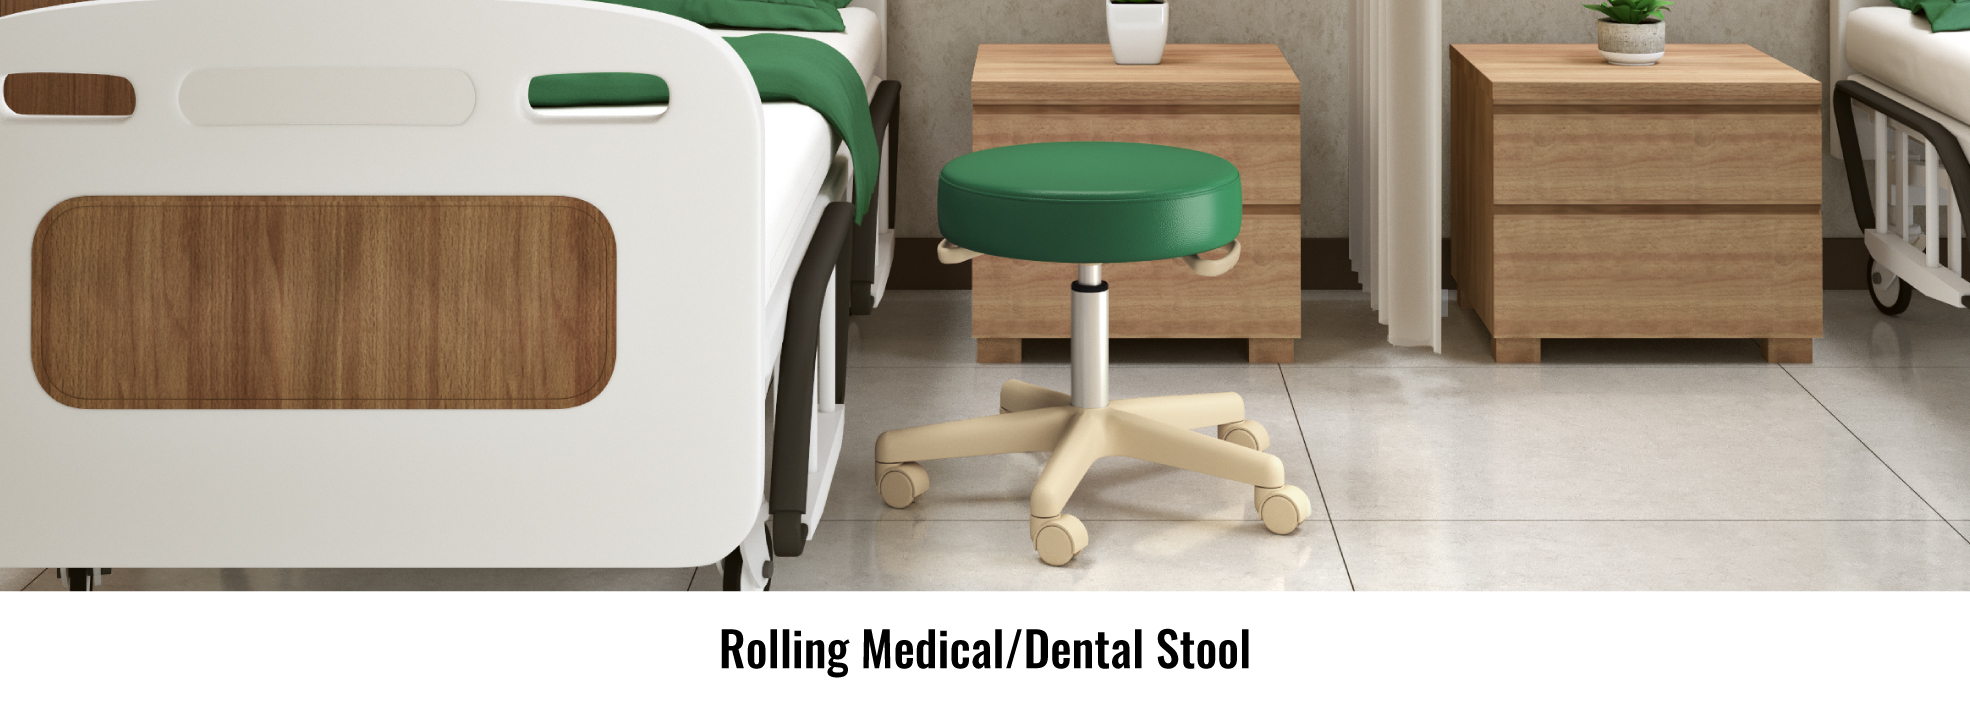 Rolling medical or dental stool shown in green